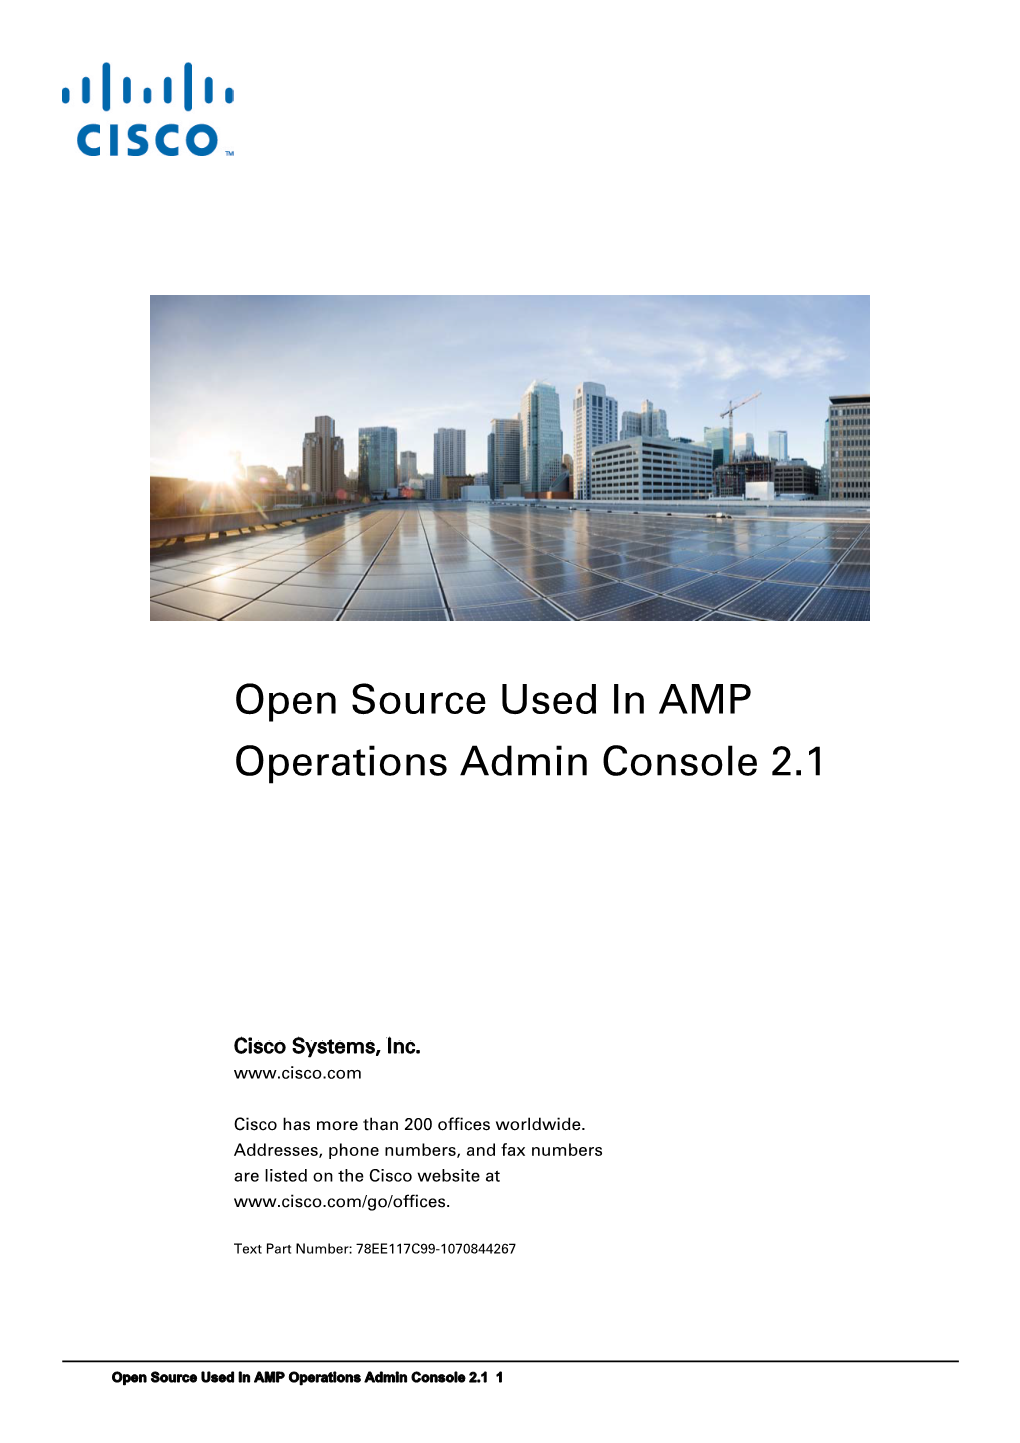 Open Source Used in AMP Operations Admin Console 2.1